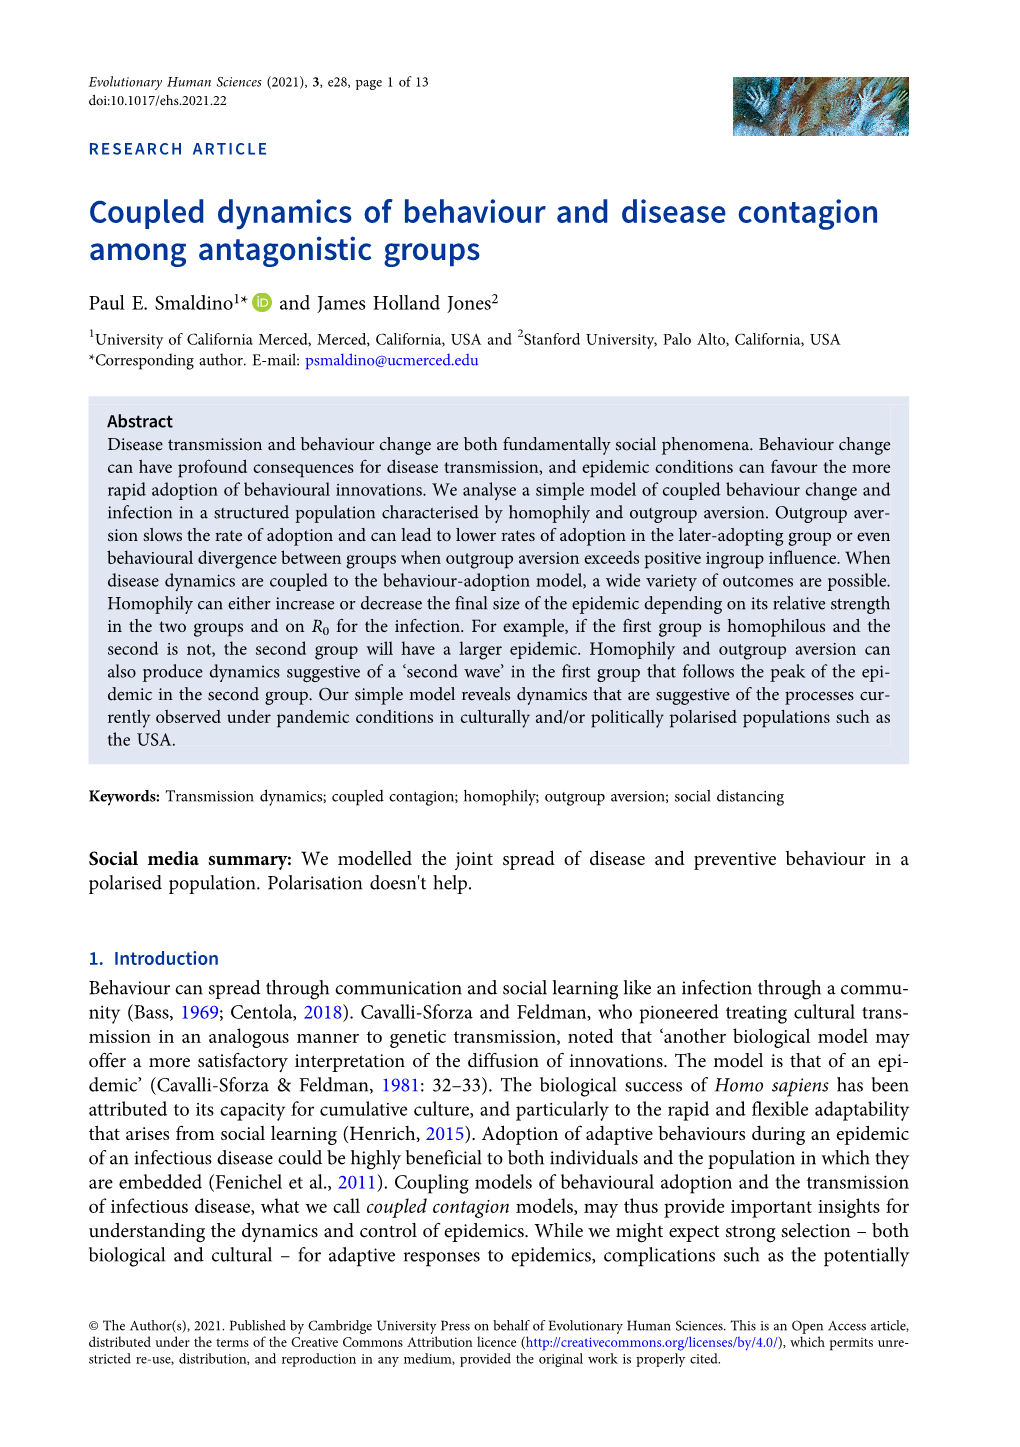 Coupled Dynamics of Behaviour and Disease Contagion Among Antagonistic Groups